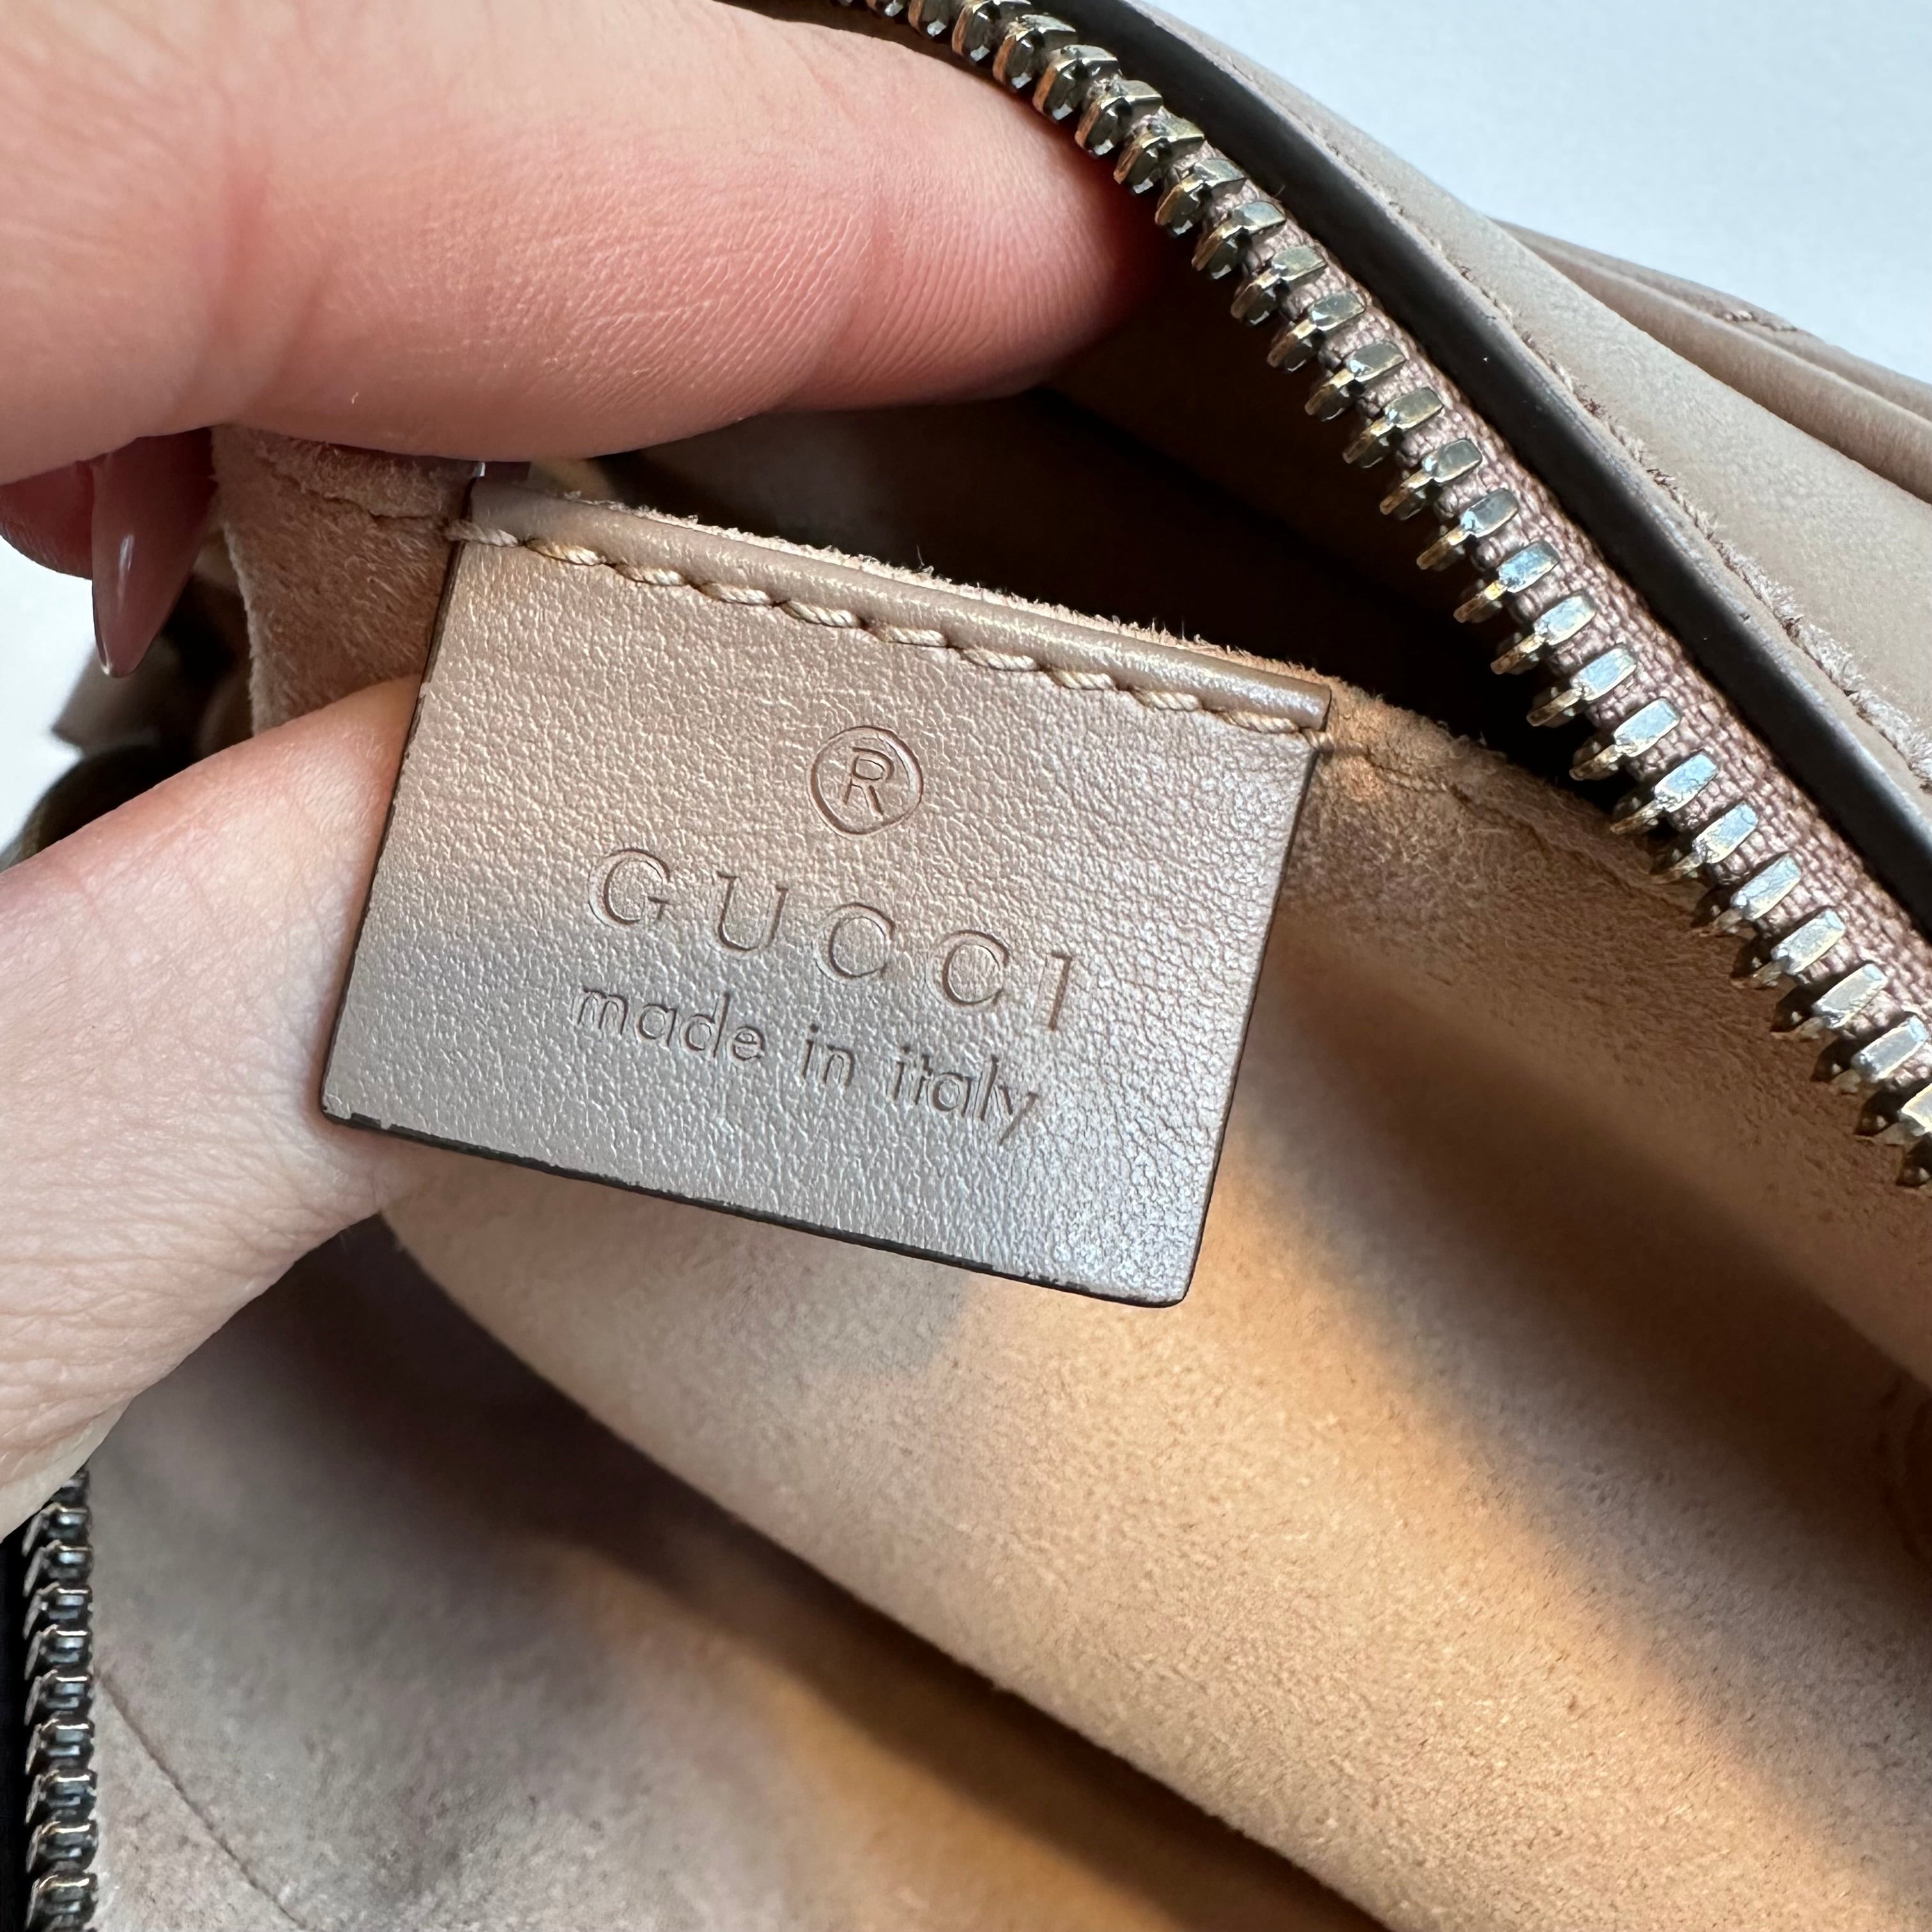 Pre-Owned GUCCI GG Marmont Small Matelasse Shoulder Bag